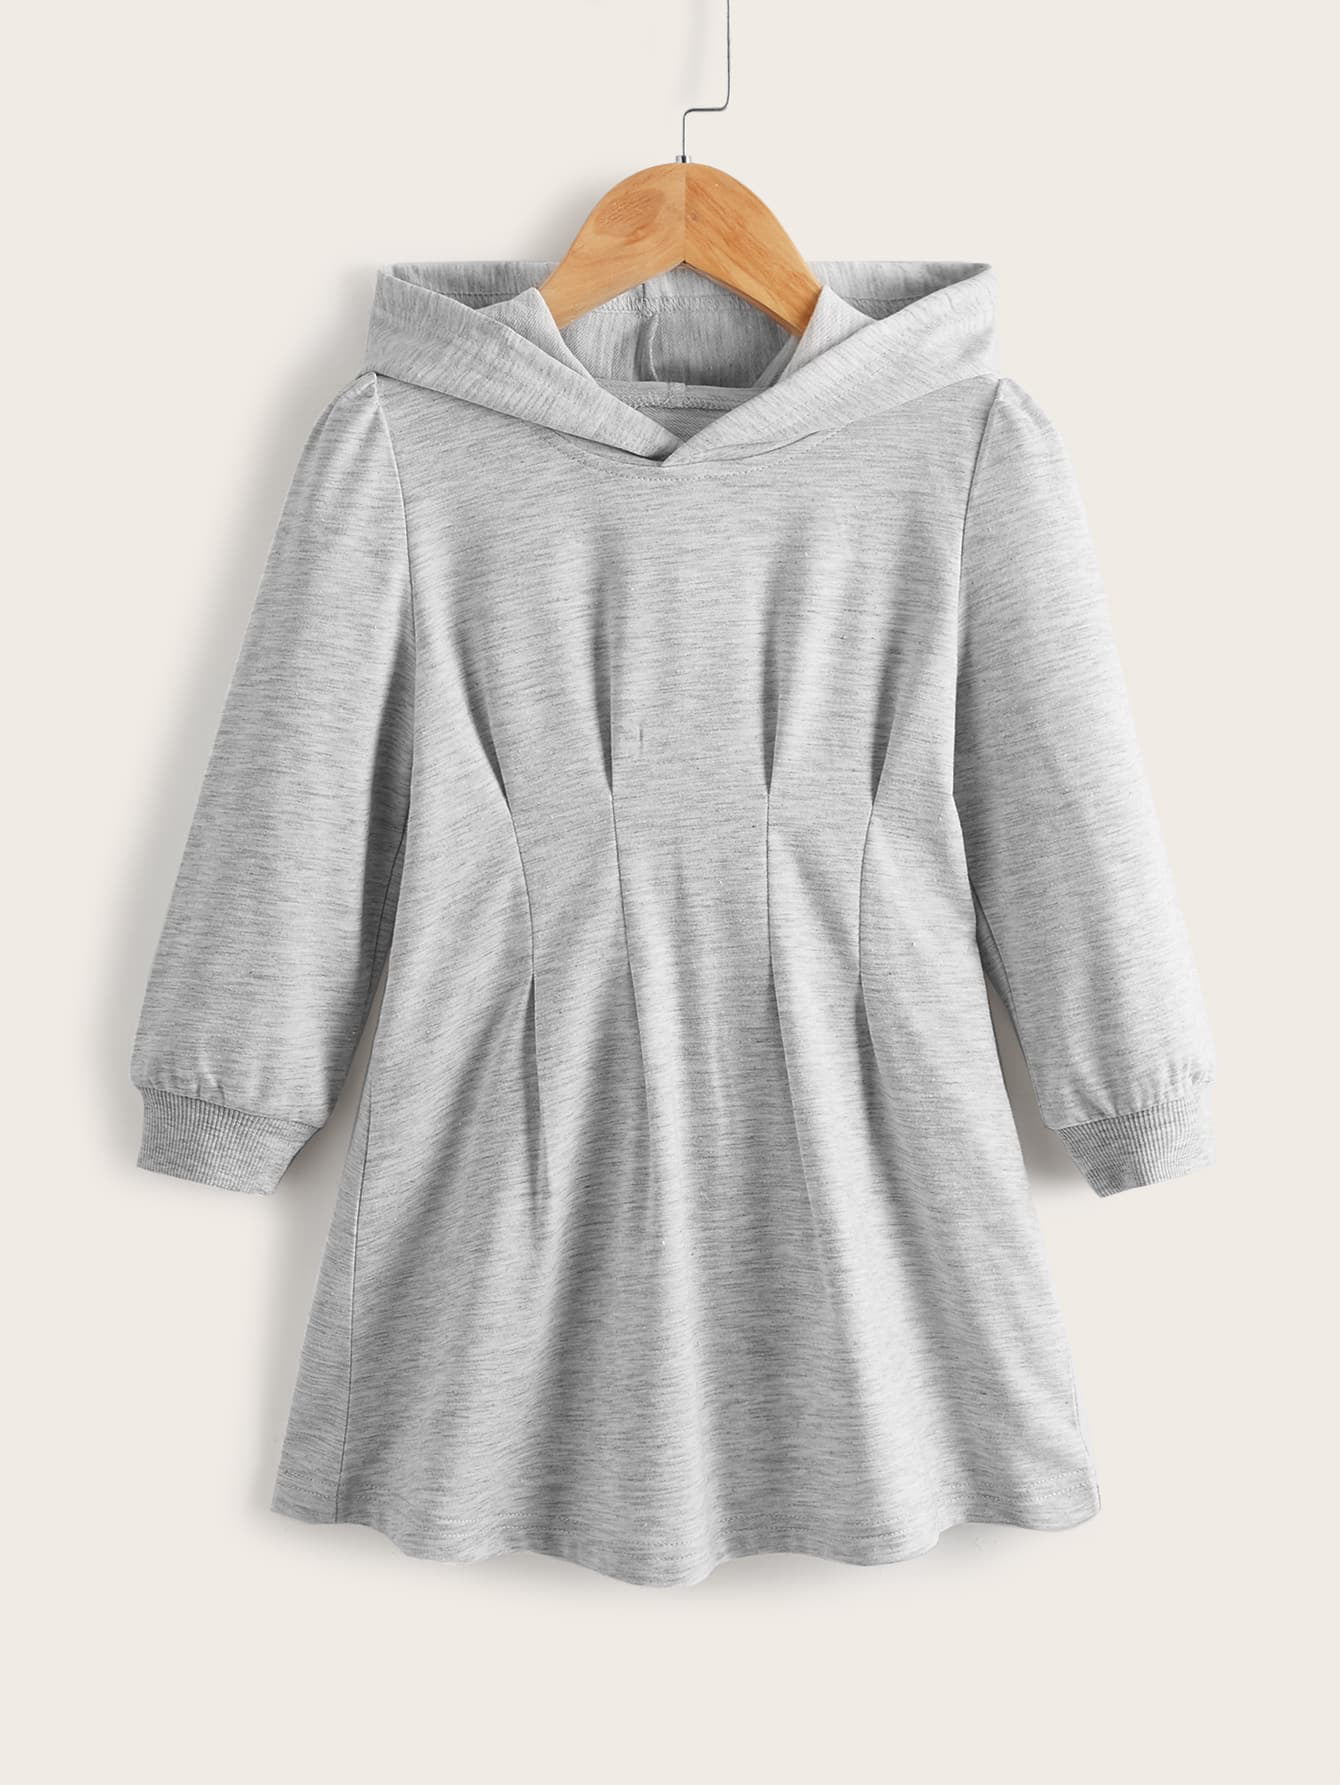 Toddler Girls' French Terry Hoodie A Line Dress Size 3T Heather Gray MSPR $17.99 